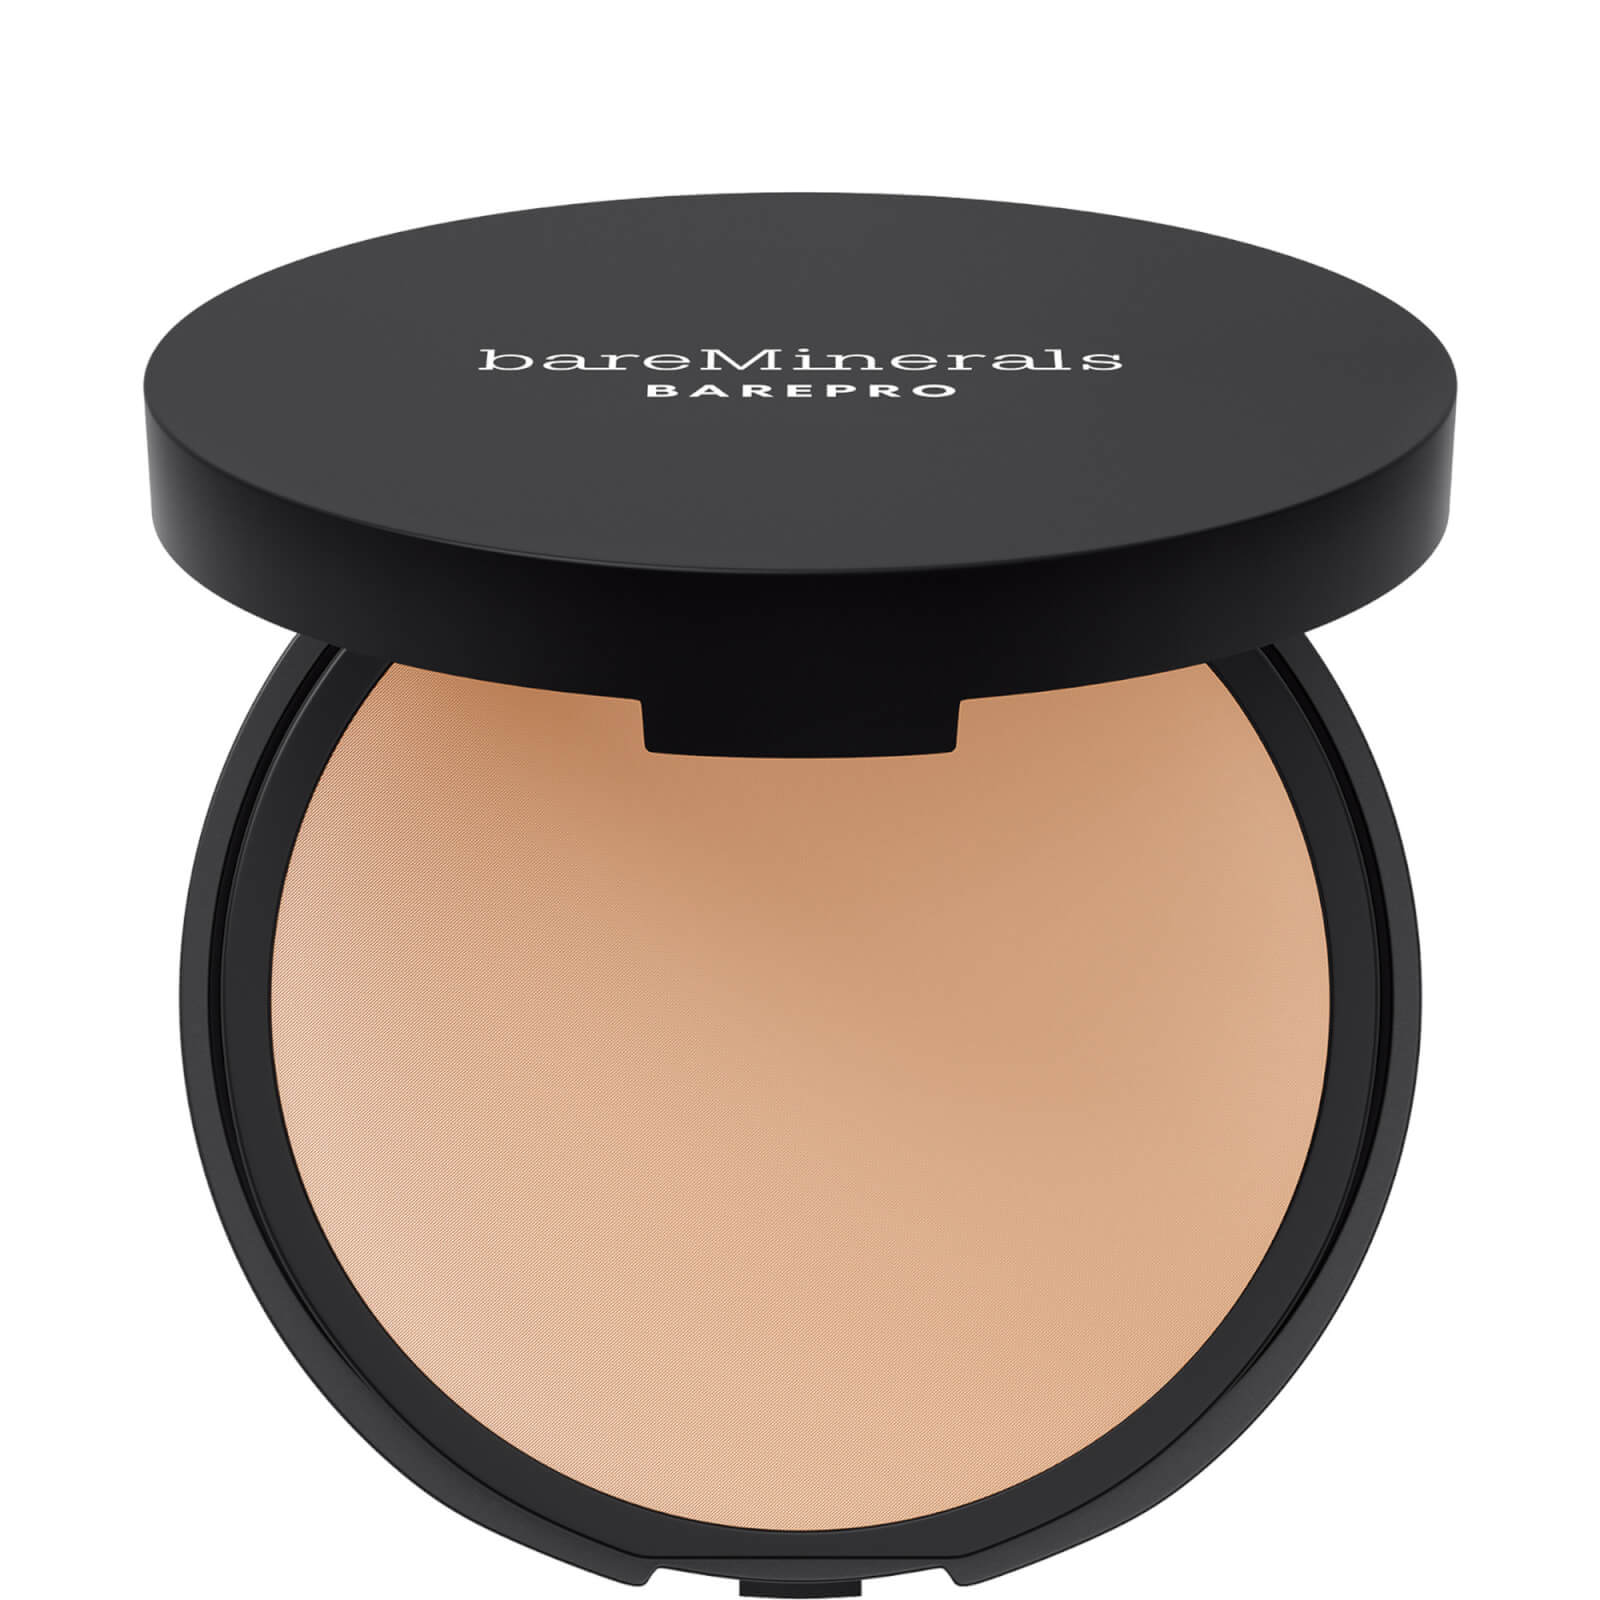 Image of bareMinerals BAREPRO Pressed 16 Hour Foundation 10g (Various Shades) - Light 22 Cool